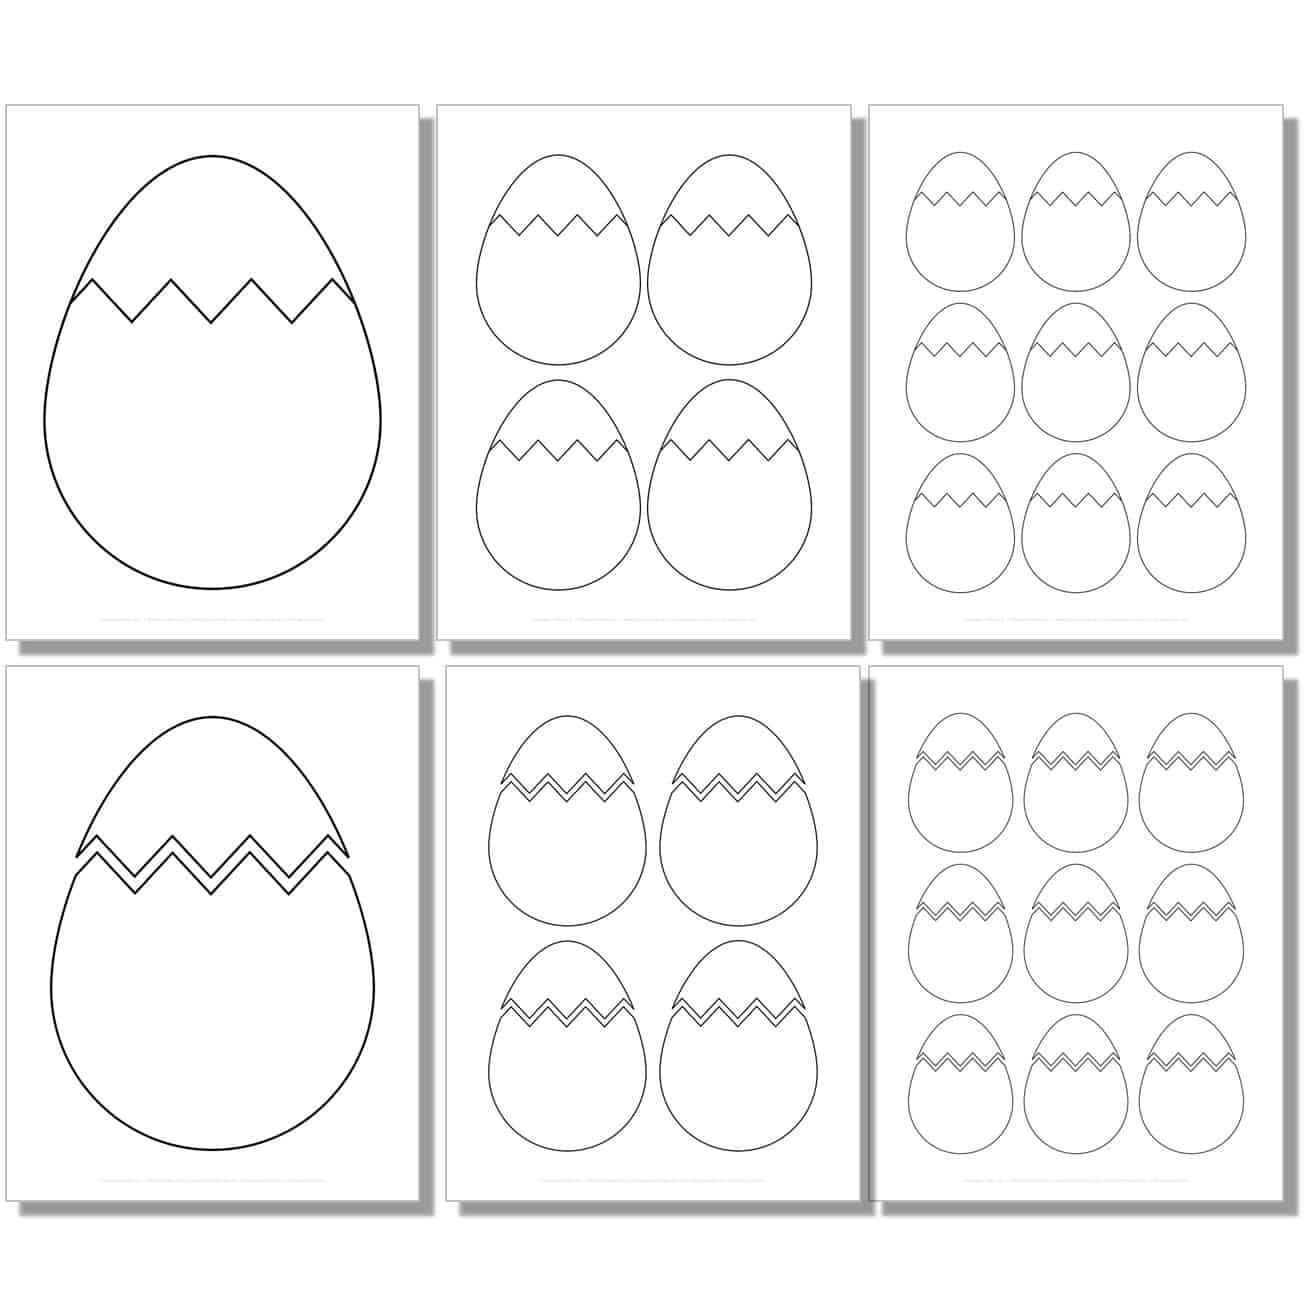 large, medium, small top cracked easter egg templates, outlines, stencils.